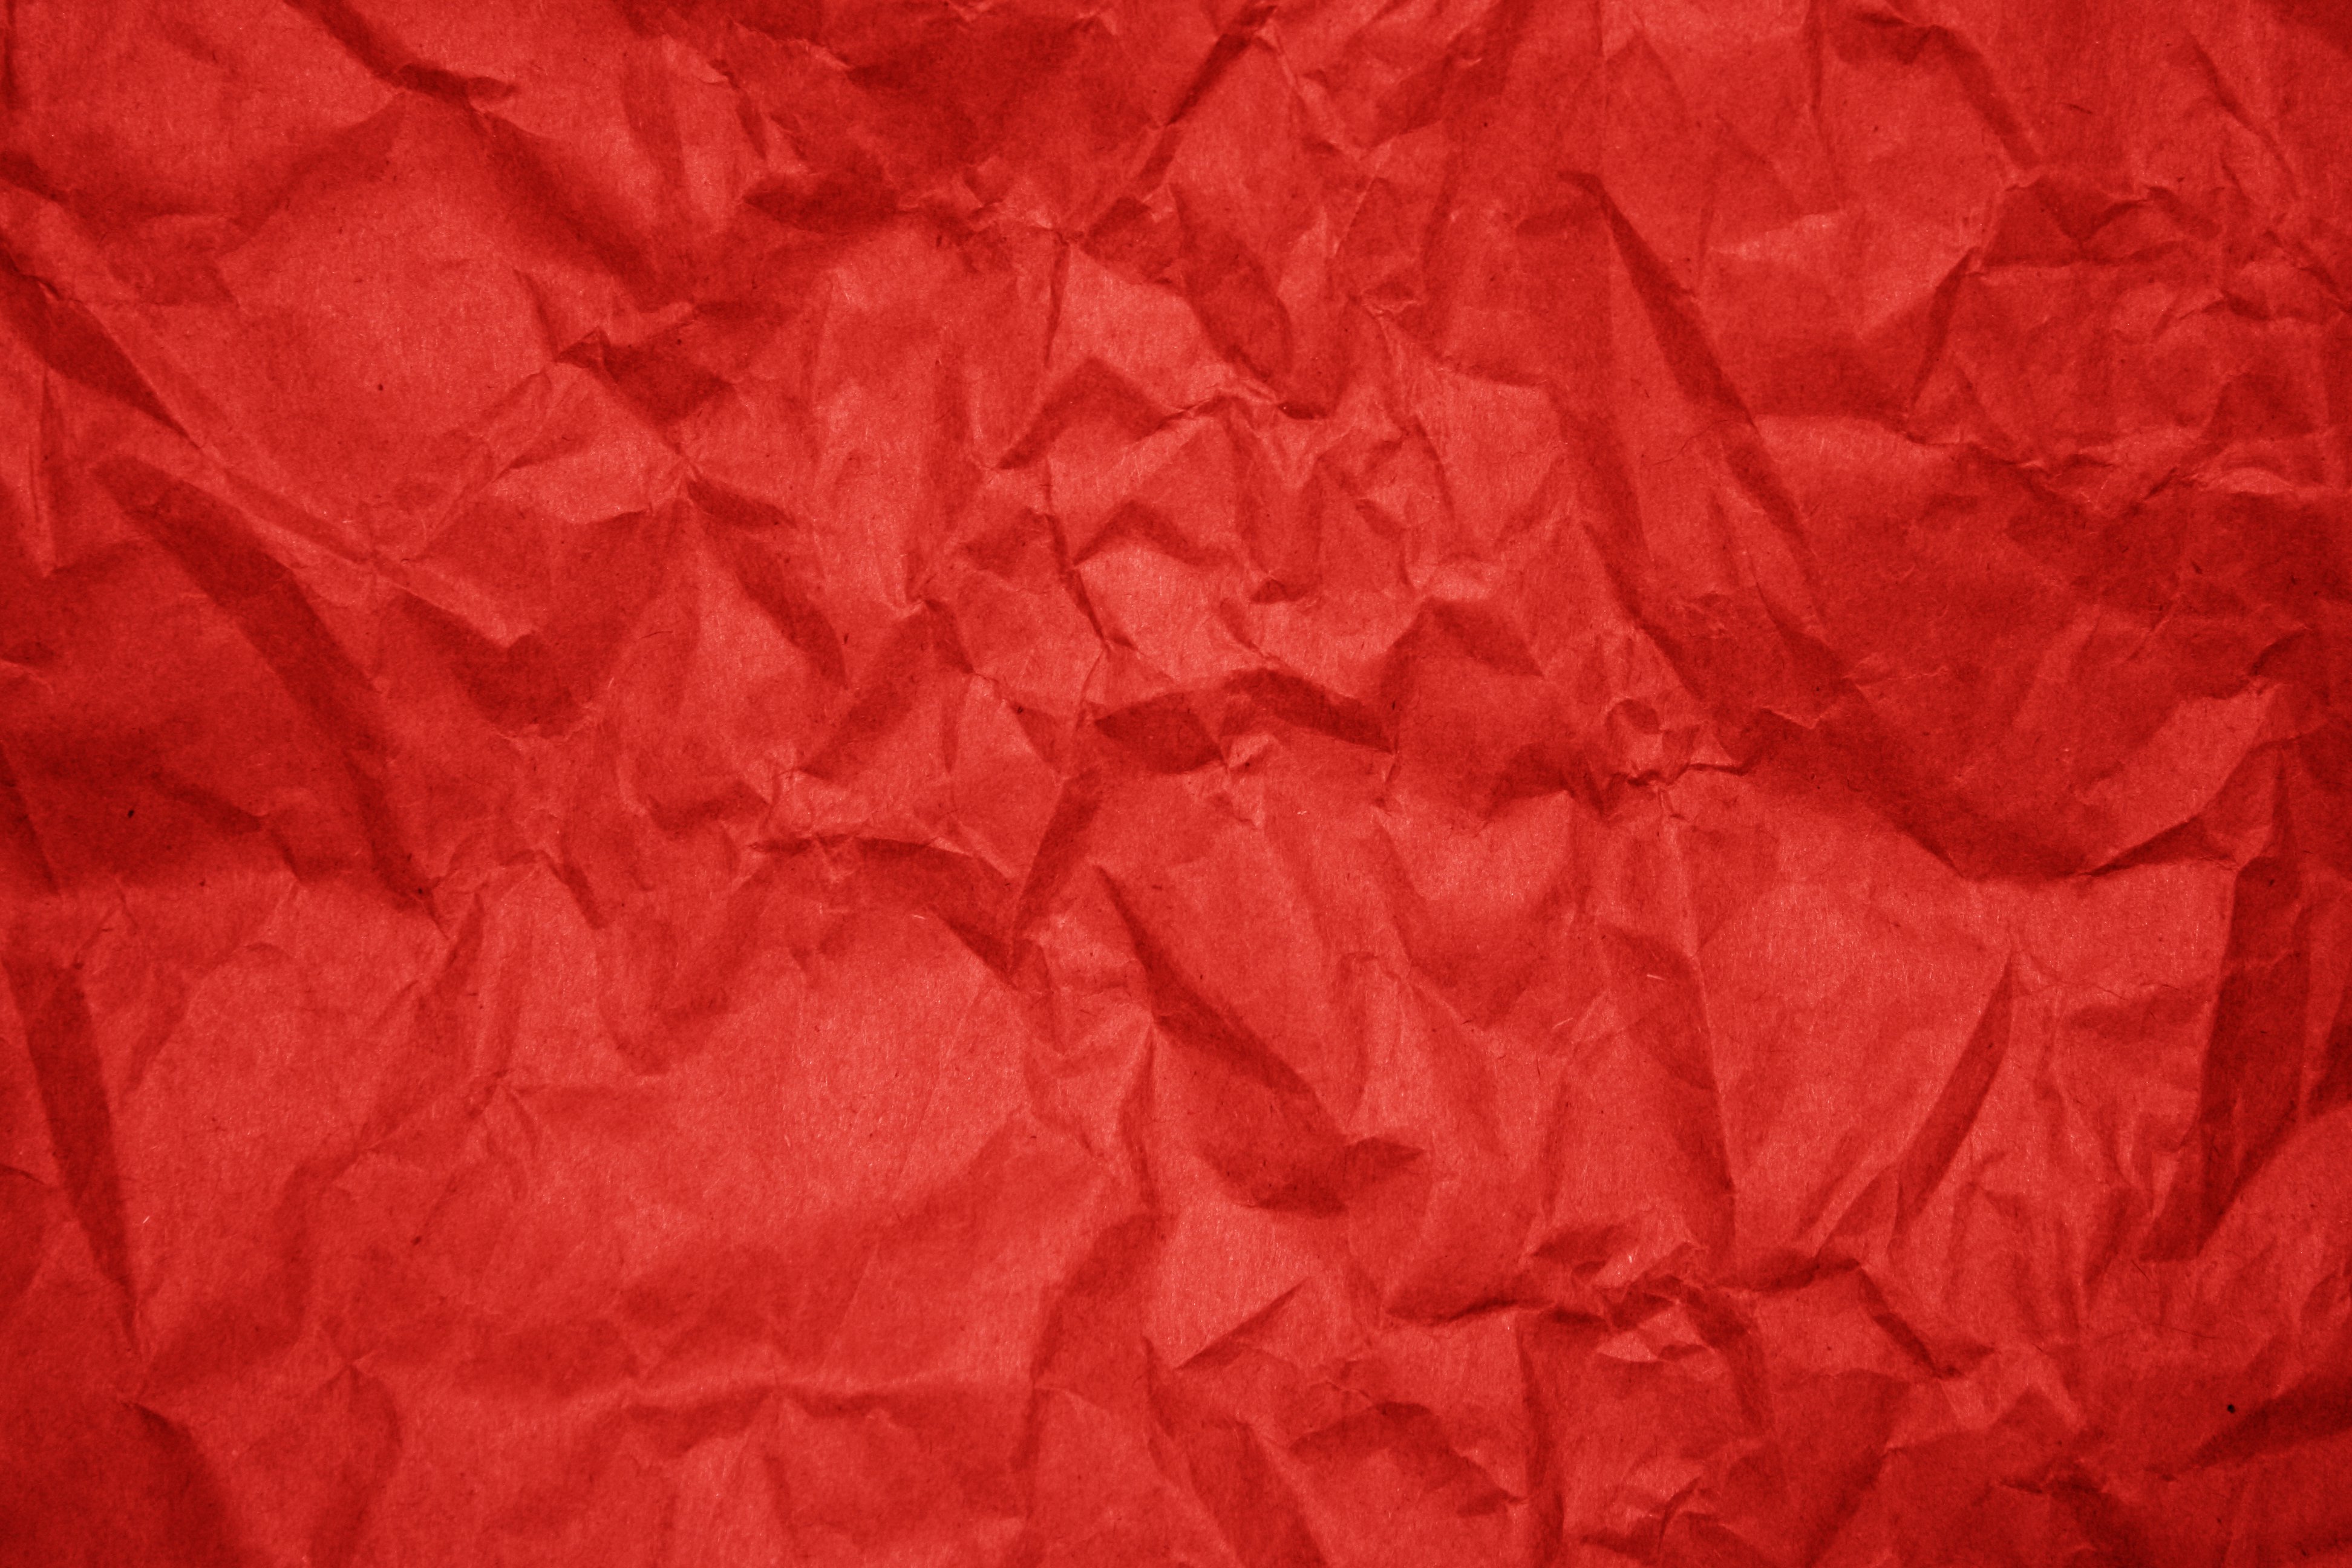 Red background paper Stock Photos, Royalty Free Red background paper Images